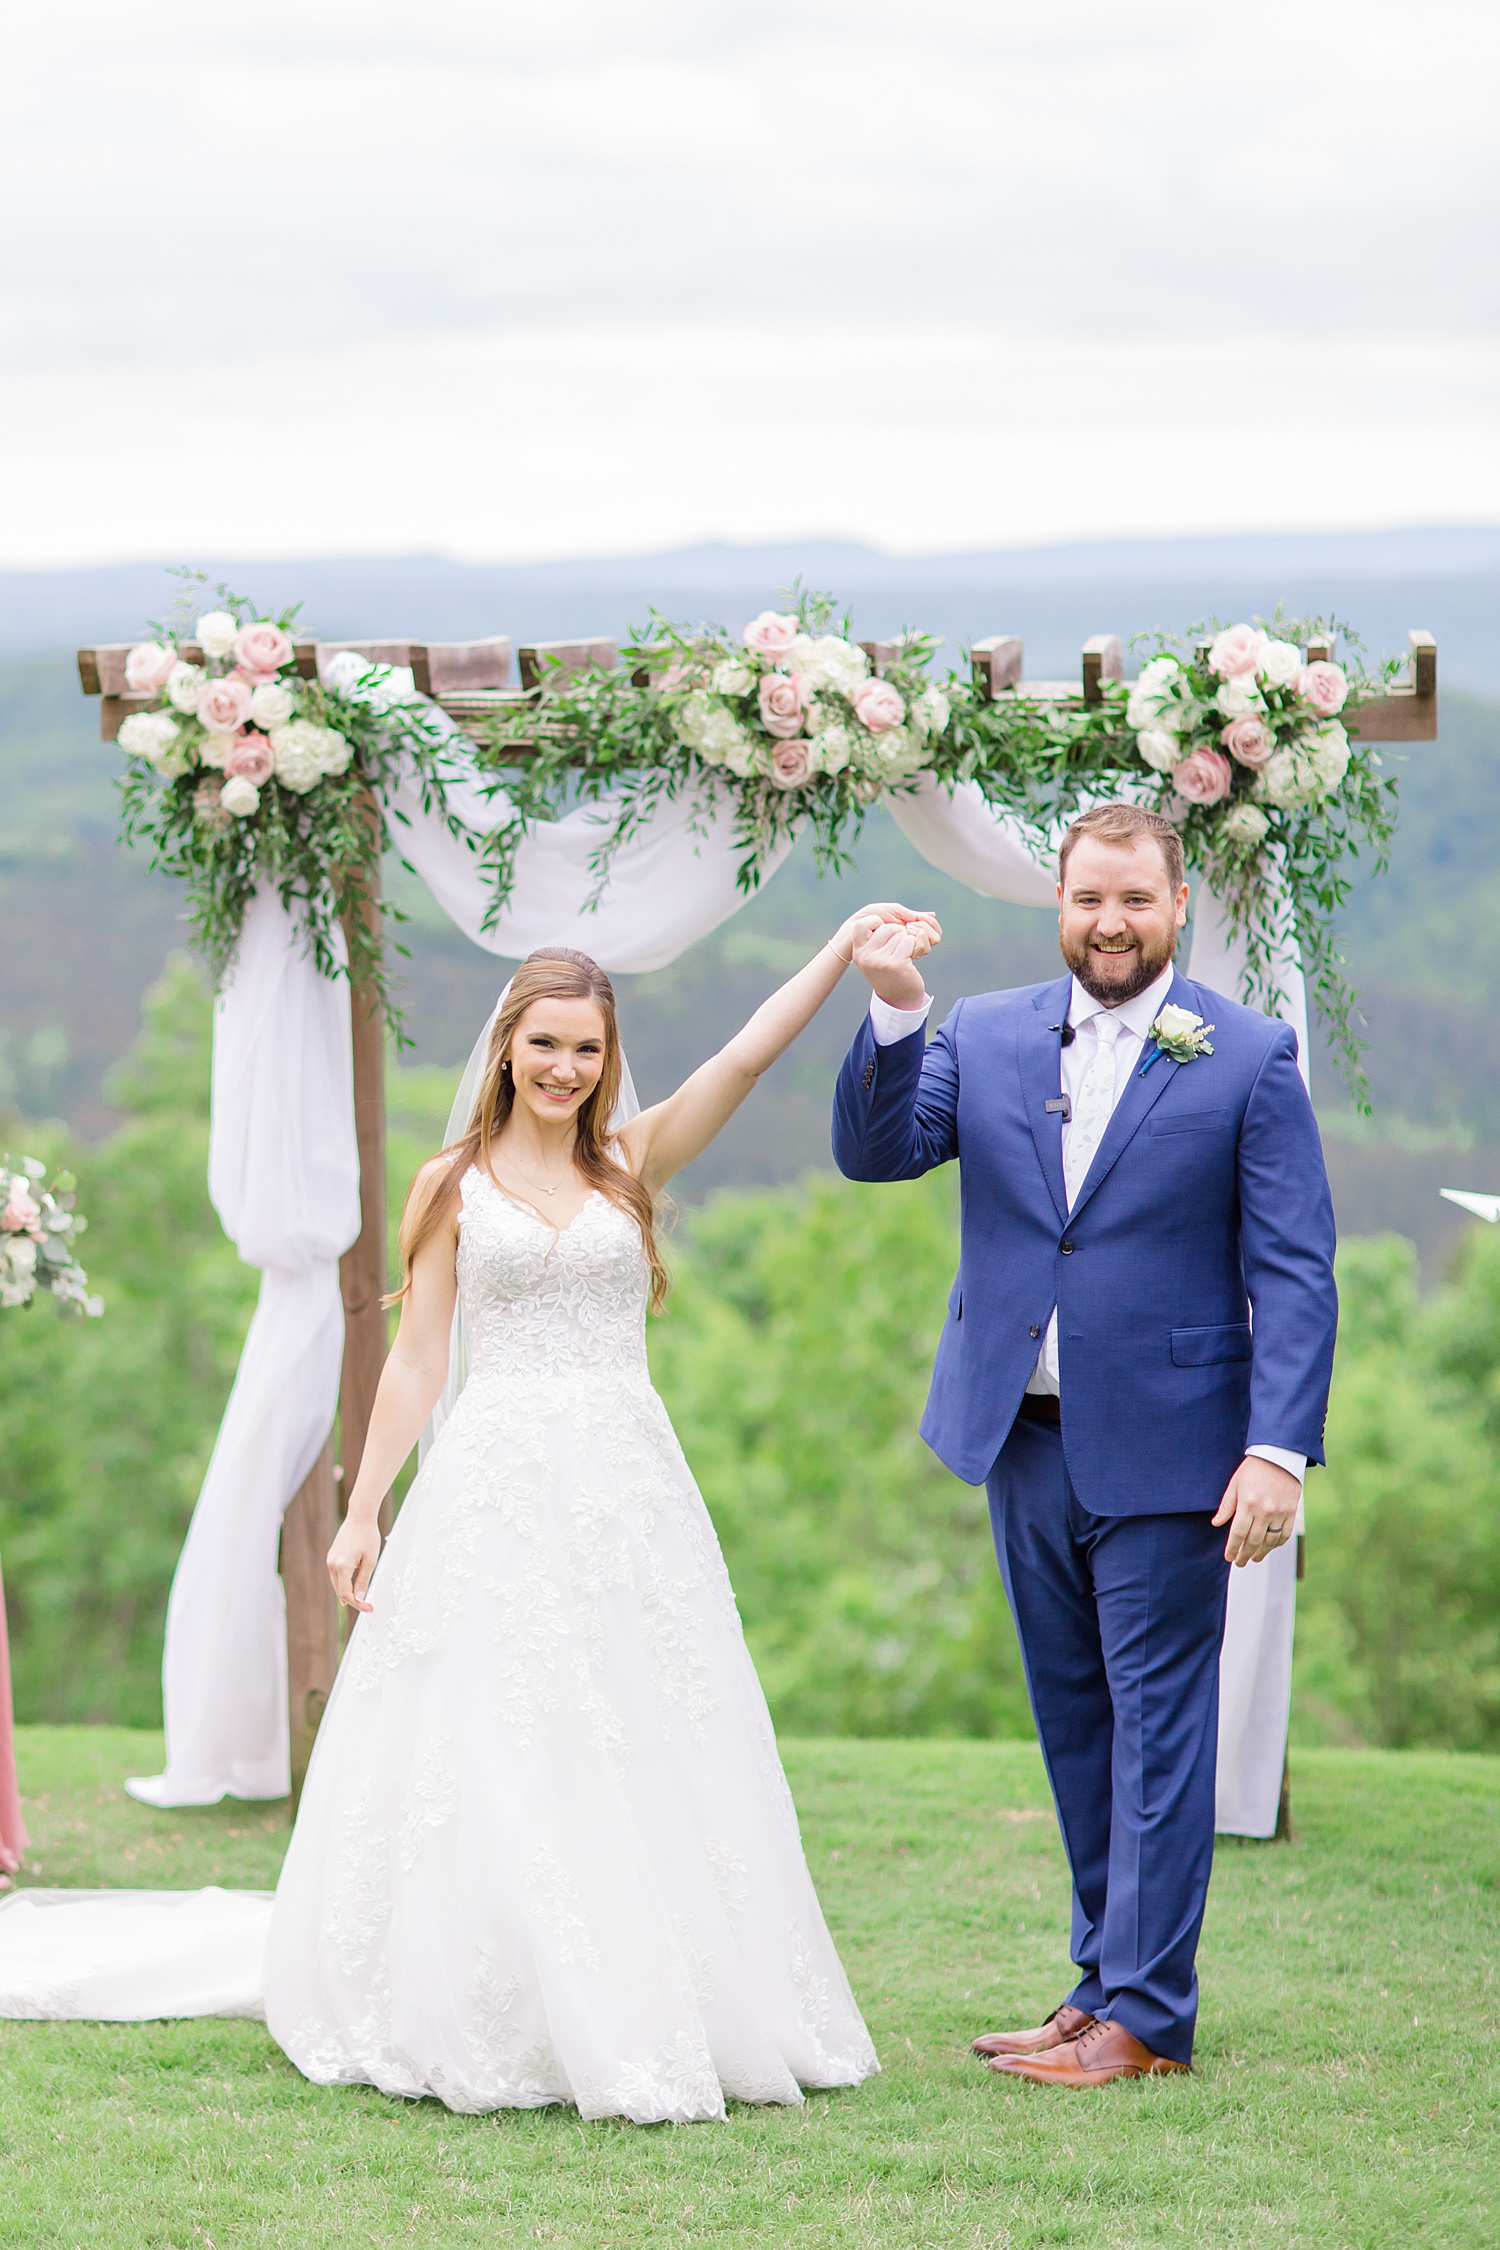 newlyweds raise the hands up in celebration of marriage after Romantic Spring Wedding at Weddings at Cabin Bluff